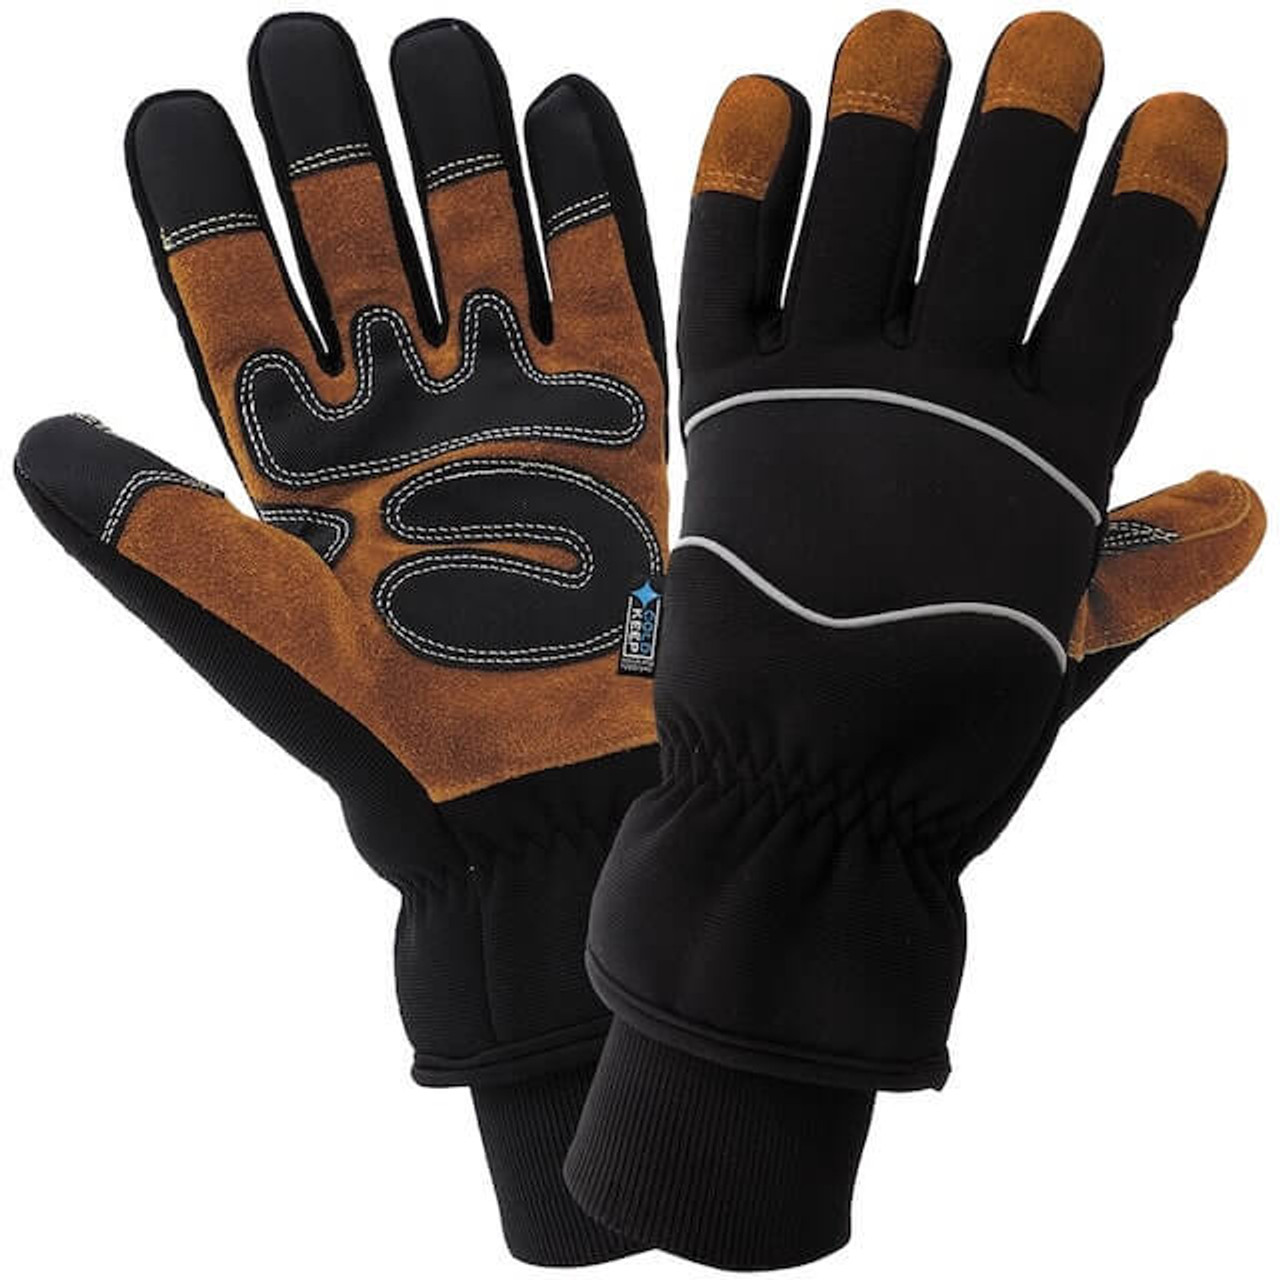 Thinsulate ICE GRIP Gloves KCL691 Thermal Cold Protection Breathable Size 10 XL 